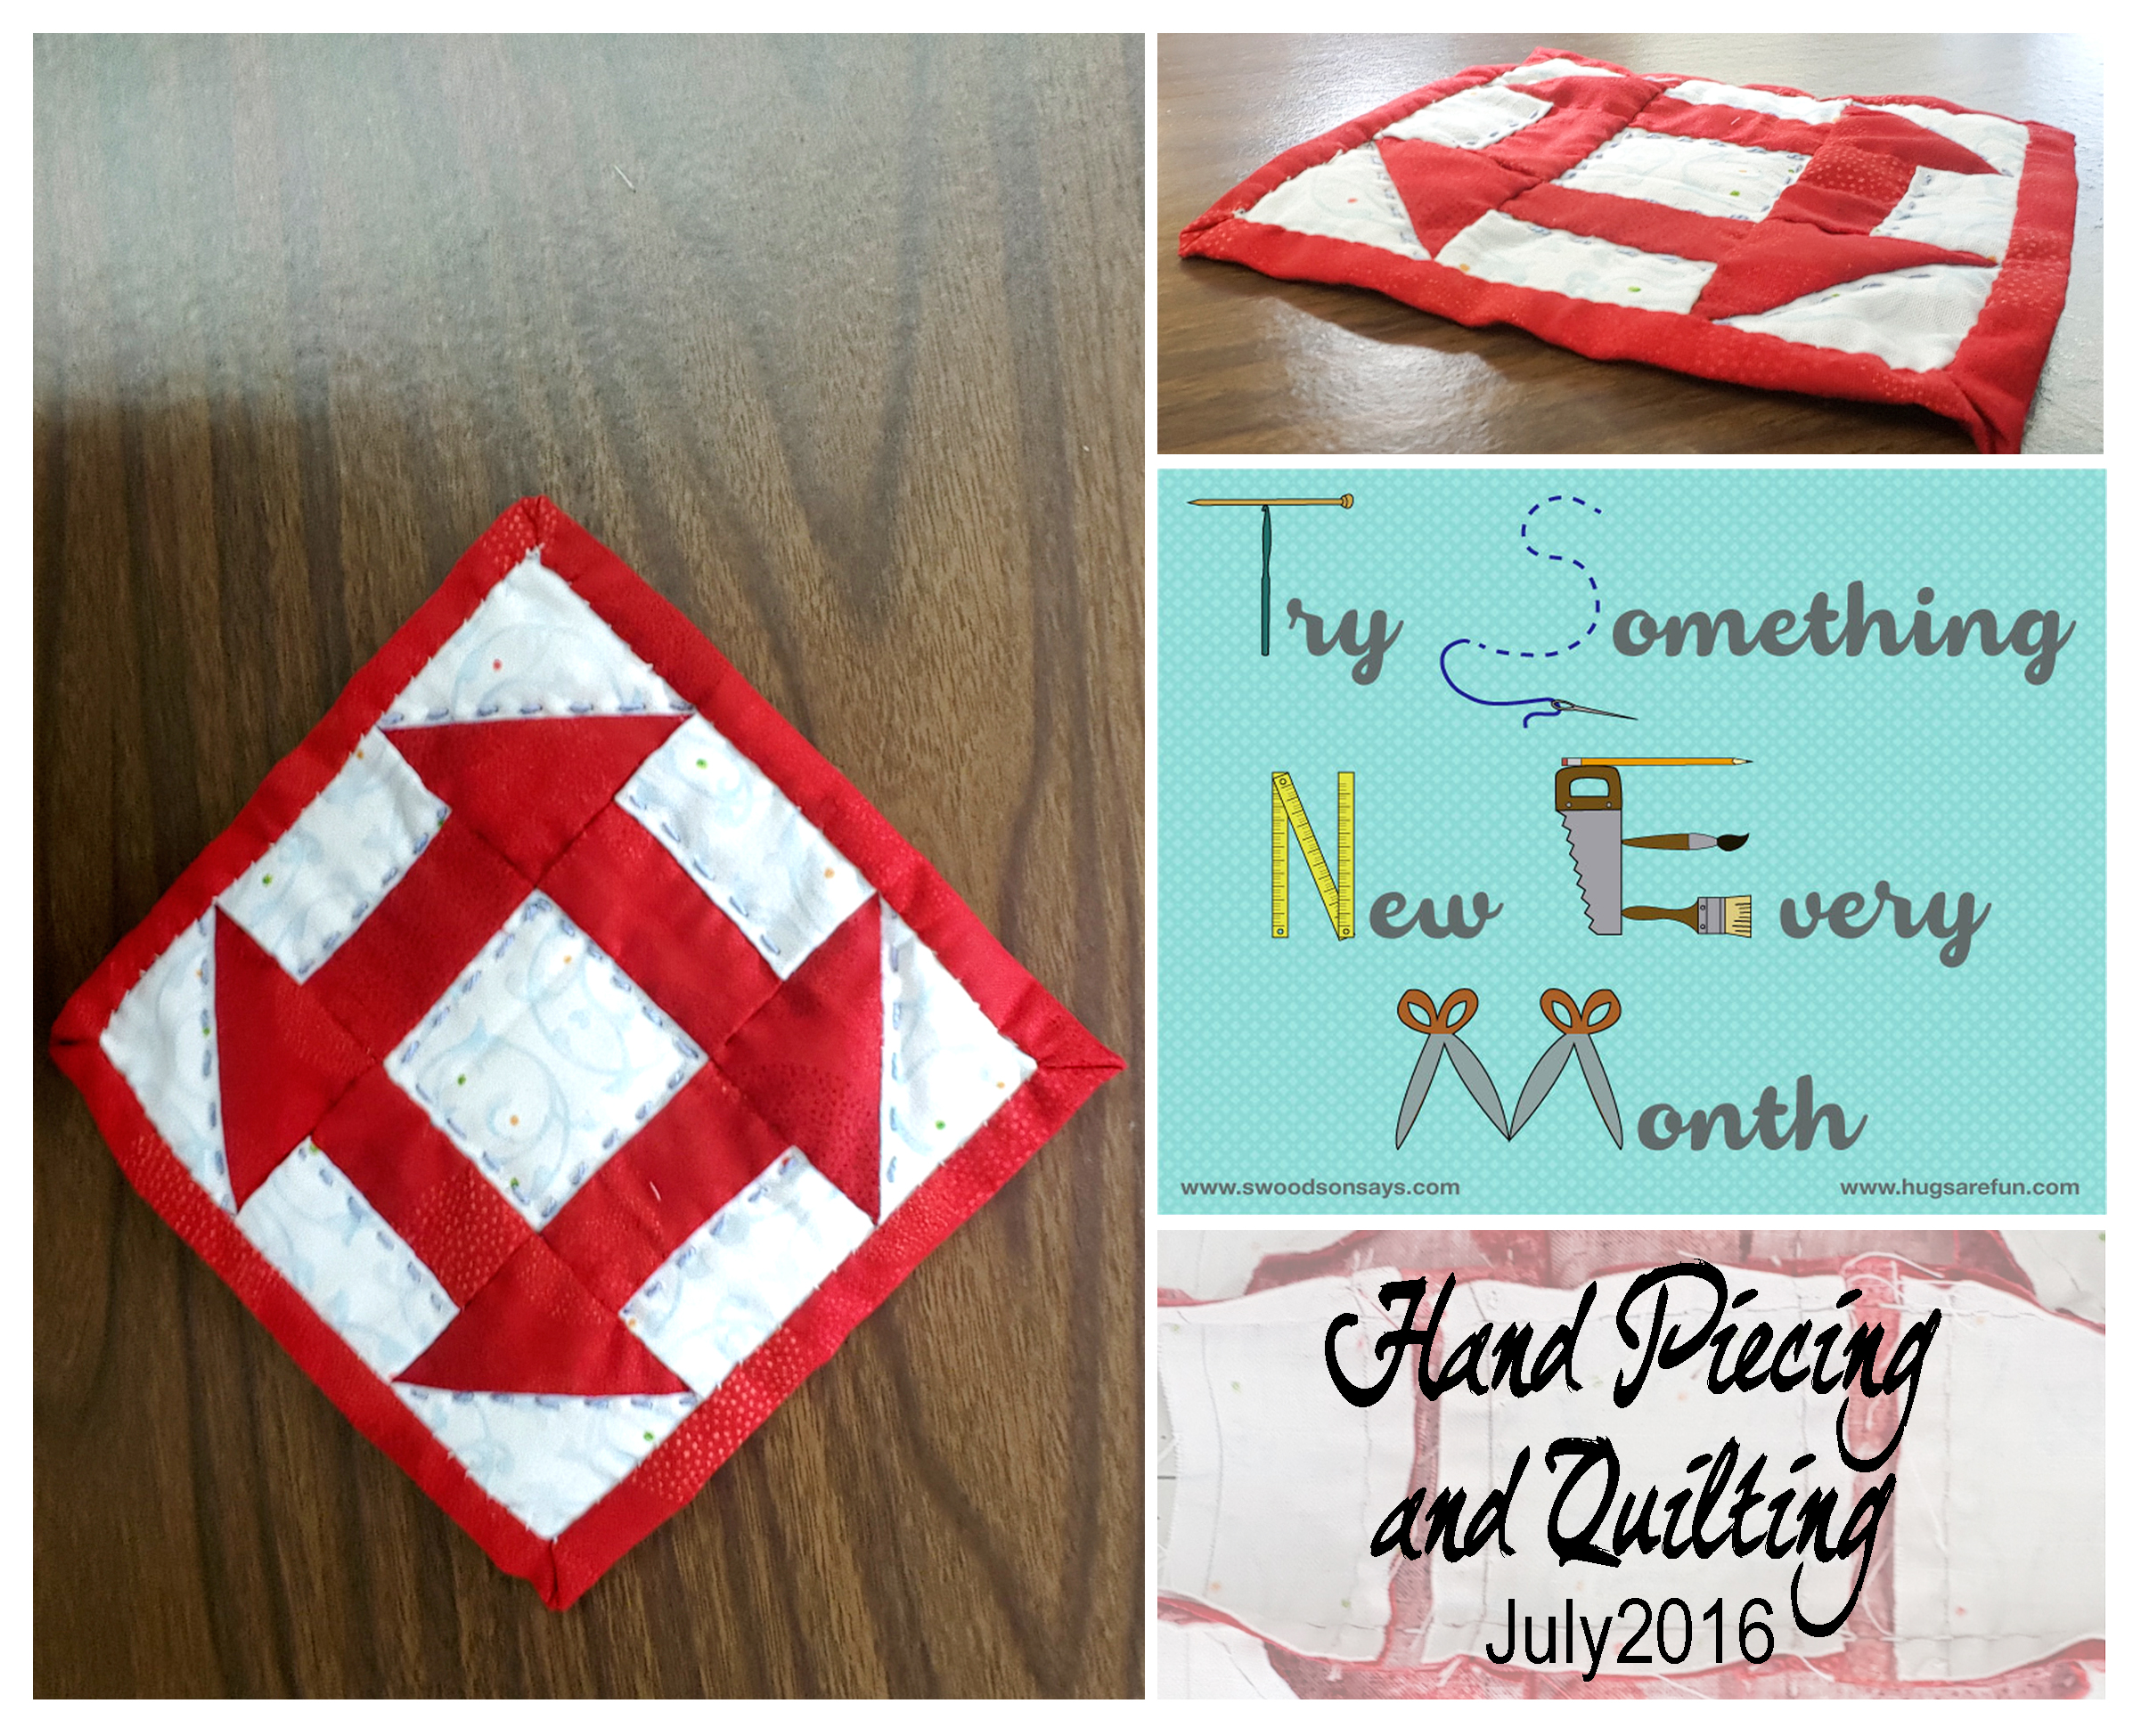 Hand Piecing and Quilting – October’s TSNEM Project